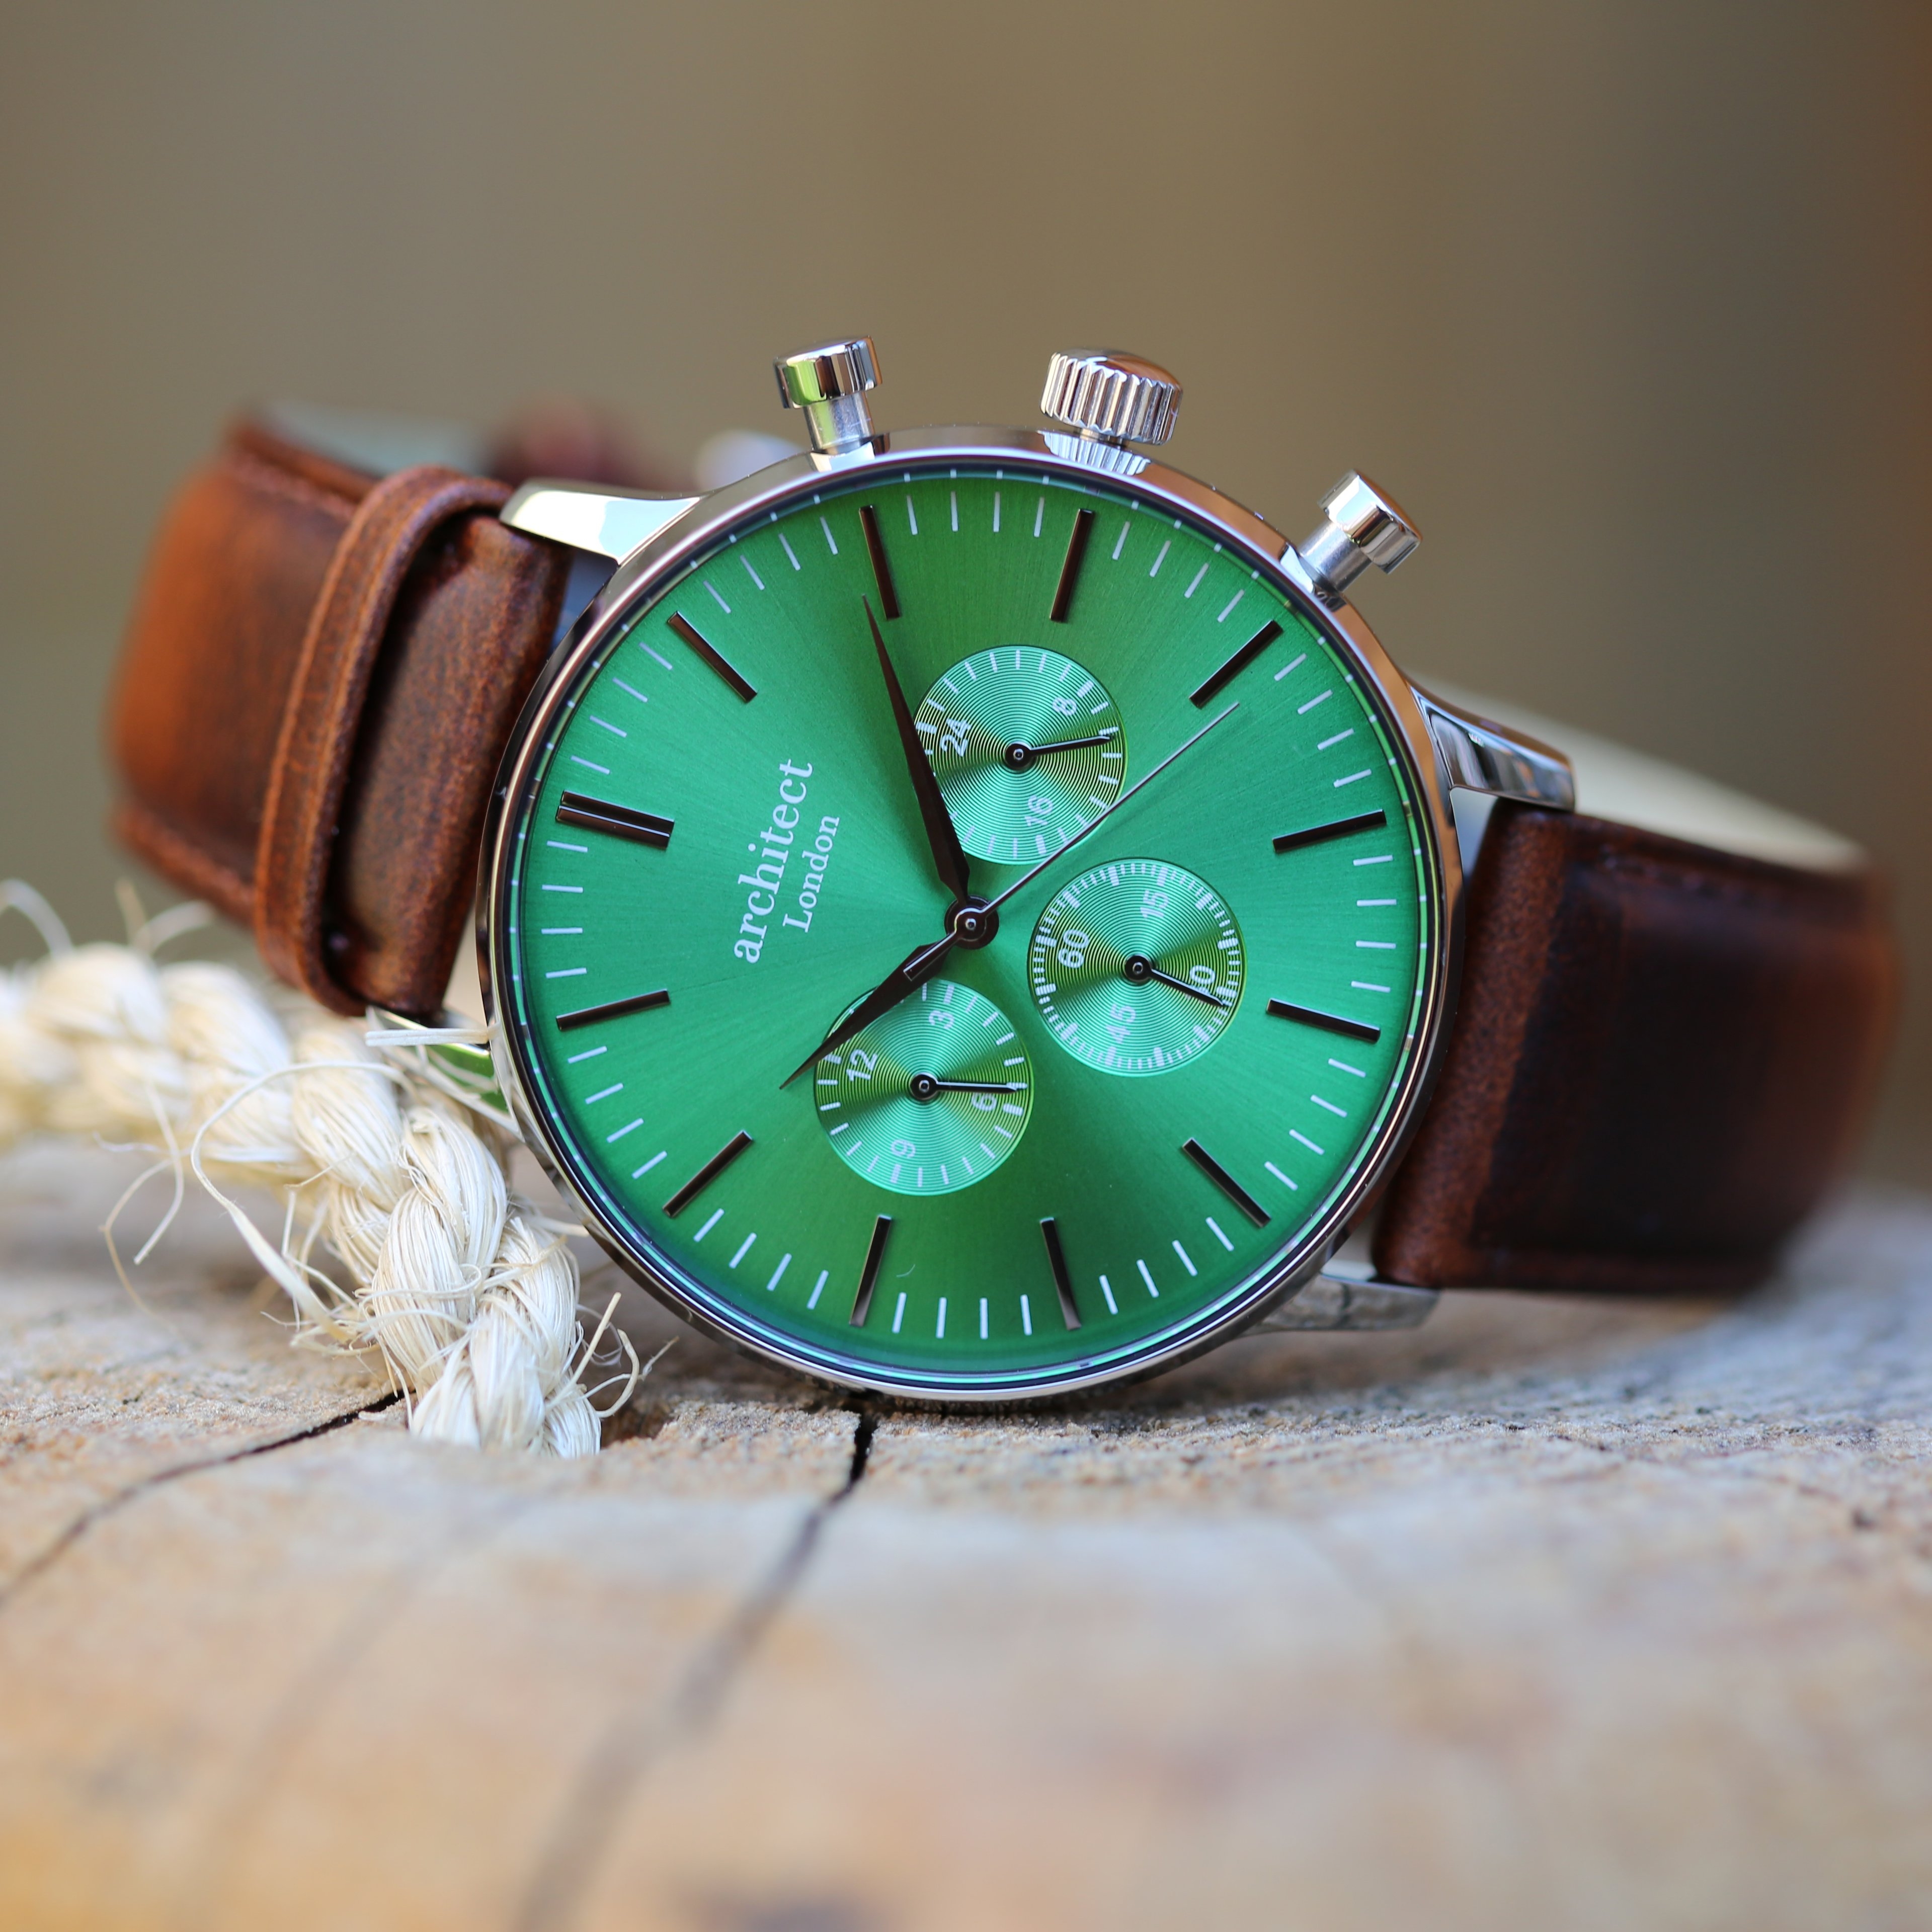 Men’s Architect Motivator In Envy Green With Walnut Strap – Modern Font Engraving – Genuine Leather – Architect Watches